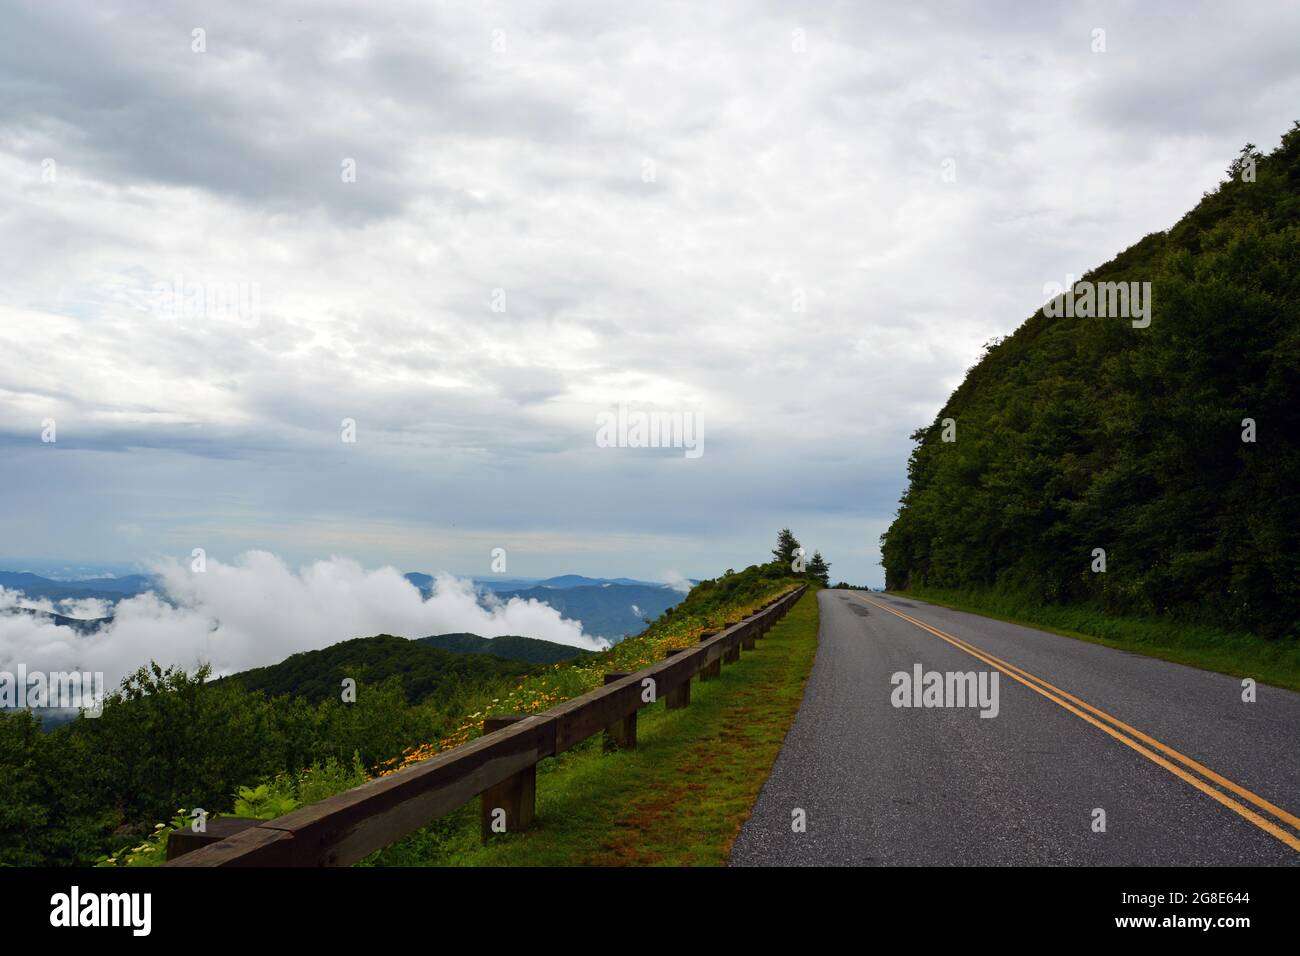 A section of the Blue Ridge Parkway that runs along the edge of the mountain in the Craggy Gardens area near Asheville, NC. Stock Photo